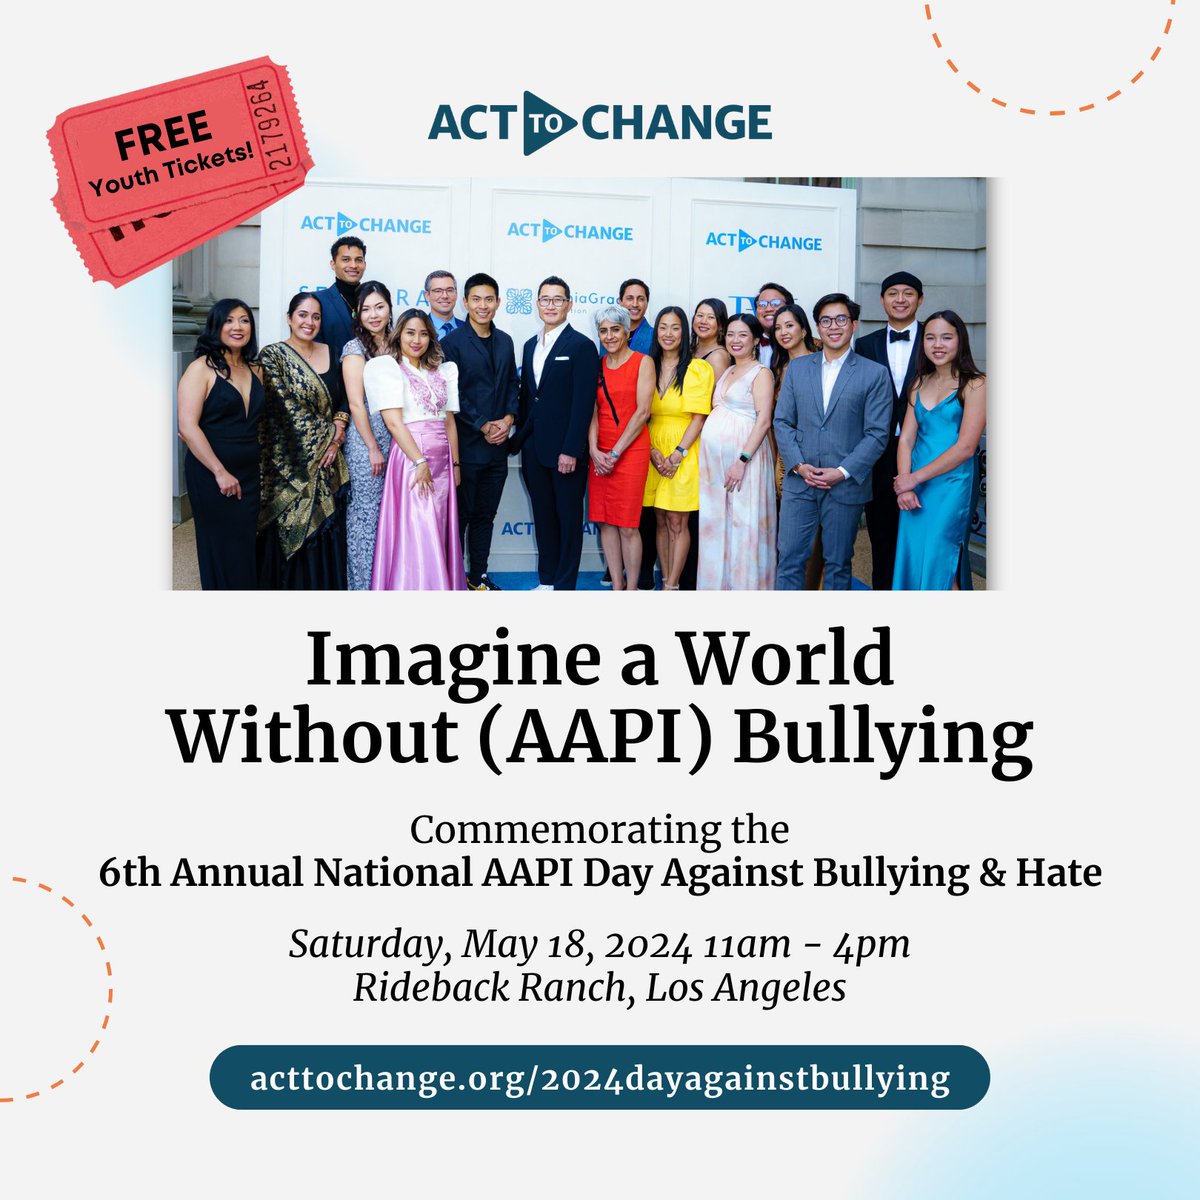 @MountainViewMS1 @RUNAAPI @aapitfa @nakasec @VelshiMSNBC @NBCAsianAmerica @CAPEUSA @jeanniemai @RepGraceMeng @HRC Join us on May 18 as we honor #VincentChin and #AANHPIHeritageMonth by collectively raising our voices against bullying. Let's imagine a world of inclusion, empathy and love for one another: acttochange.org/2024dayagainst…